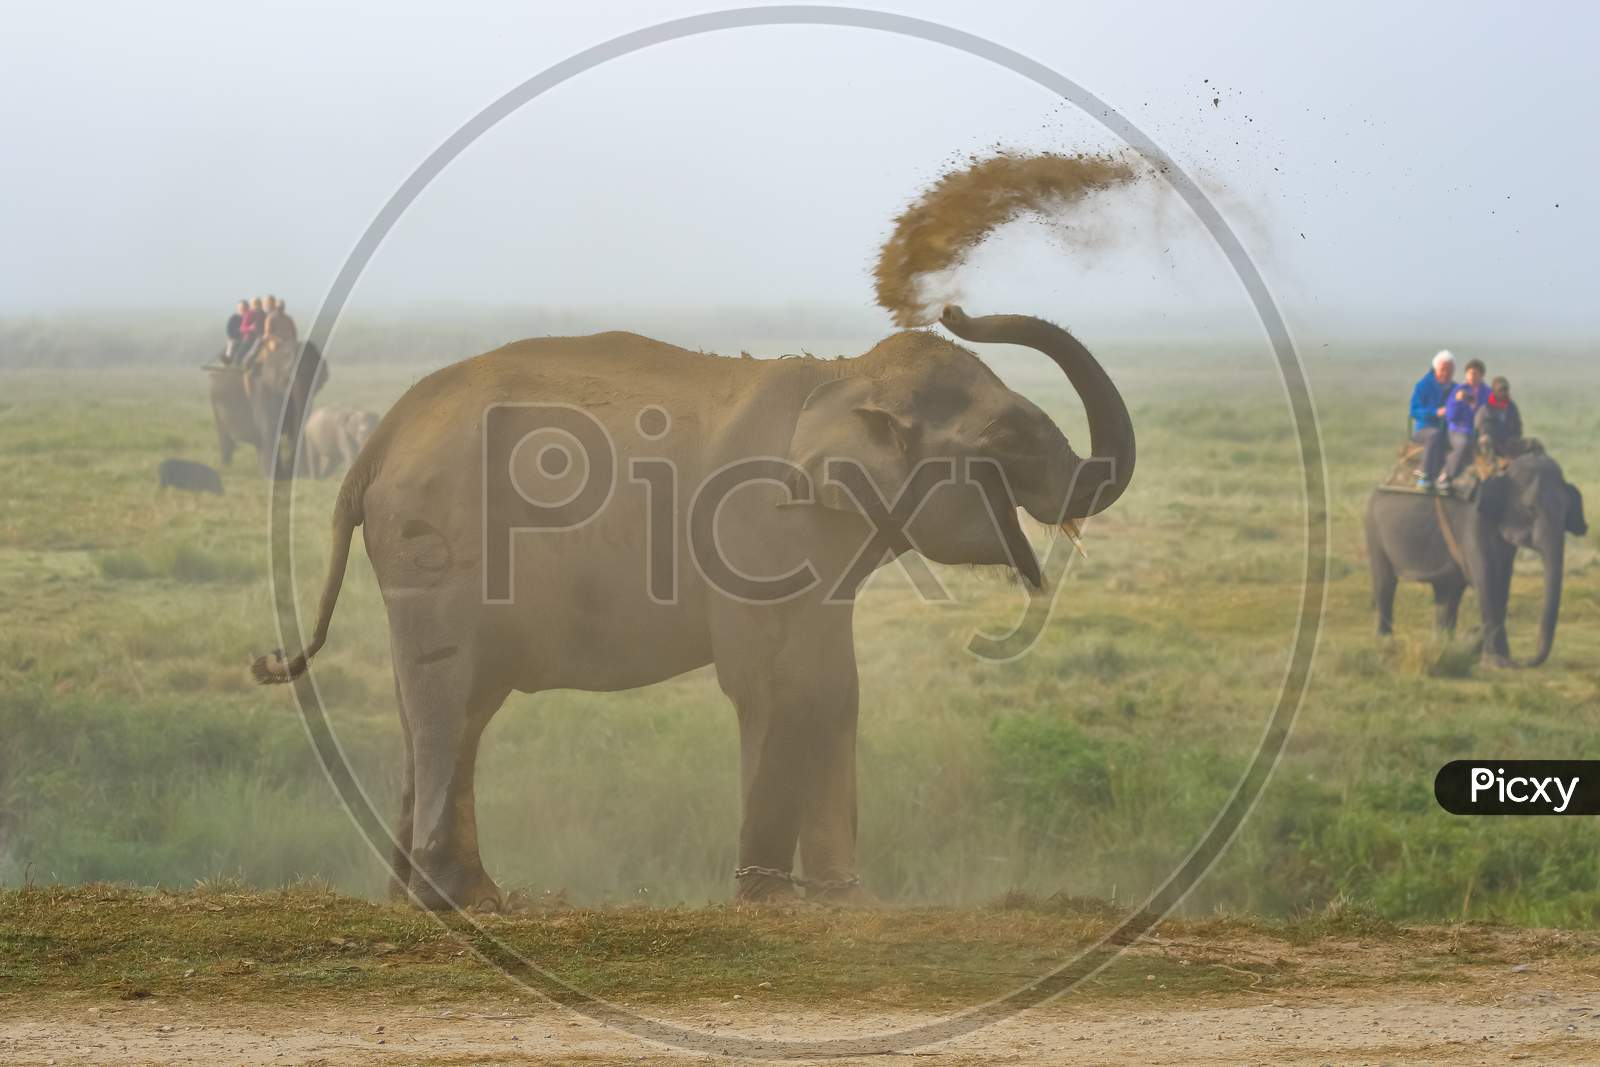 a wild Asian Elephant with tusks standing at the edge of a jungle at a National park and splattering mud on its body